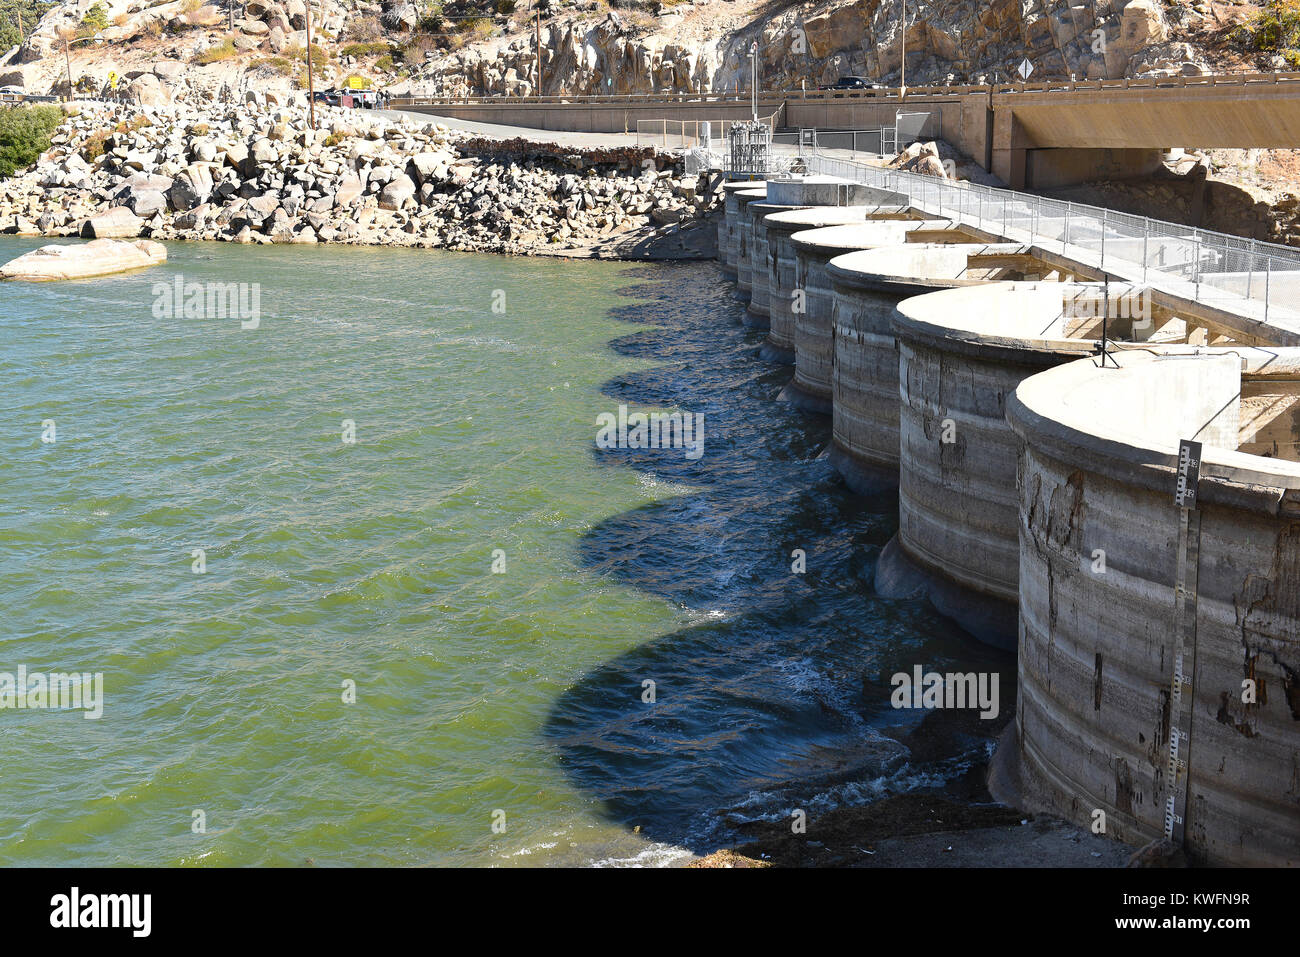 BIG BEAR, CALIFORNIA - SEPTEMBER 25, 2016: Bear Valley Dam. The dam built in 1912 created Big Bear Lake, a recreation area and importat water source f Stock Photo